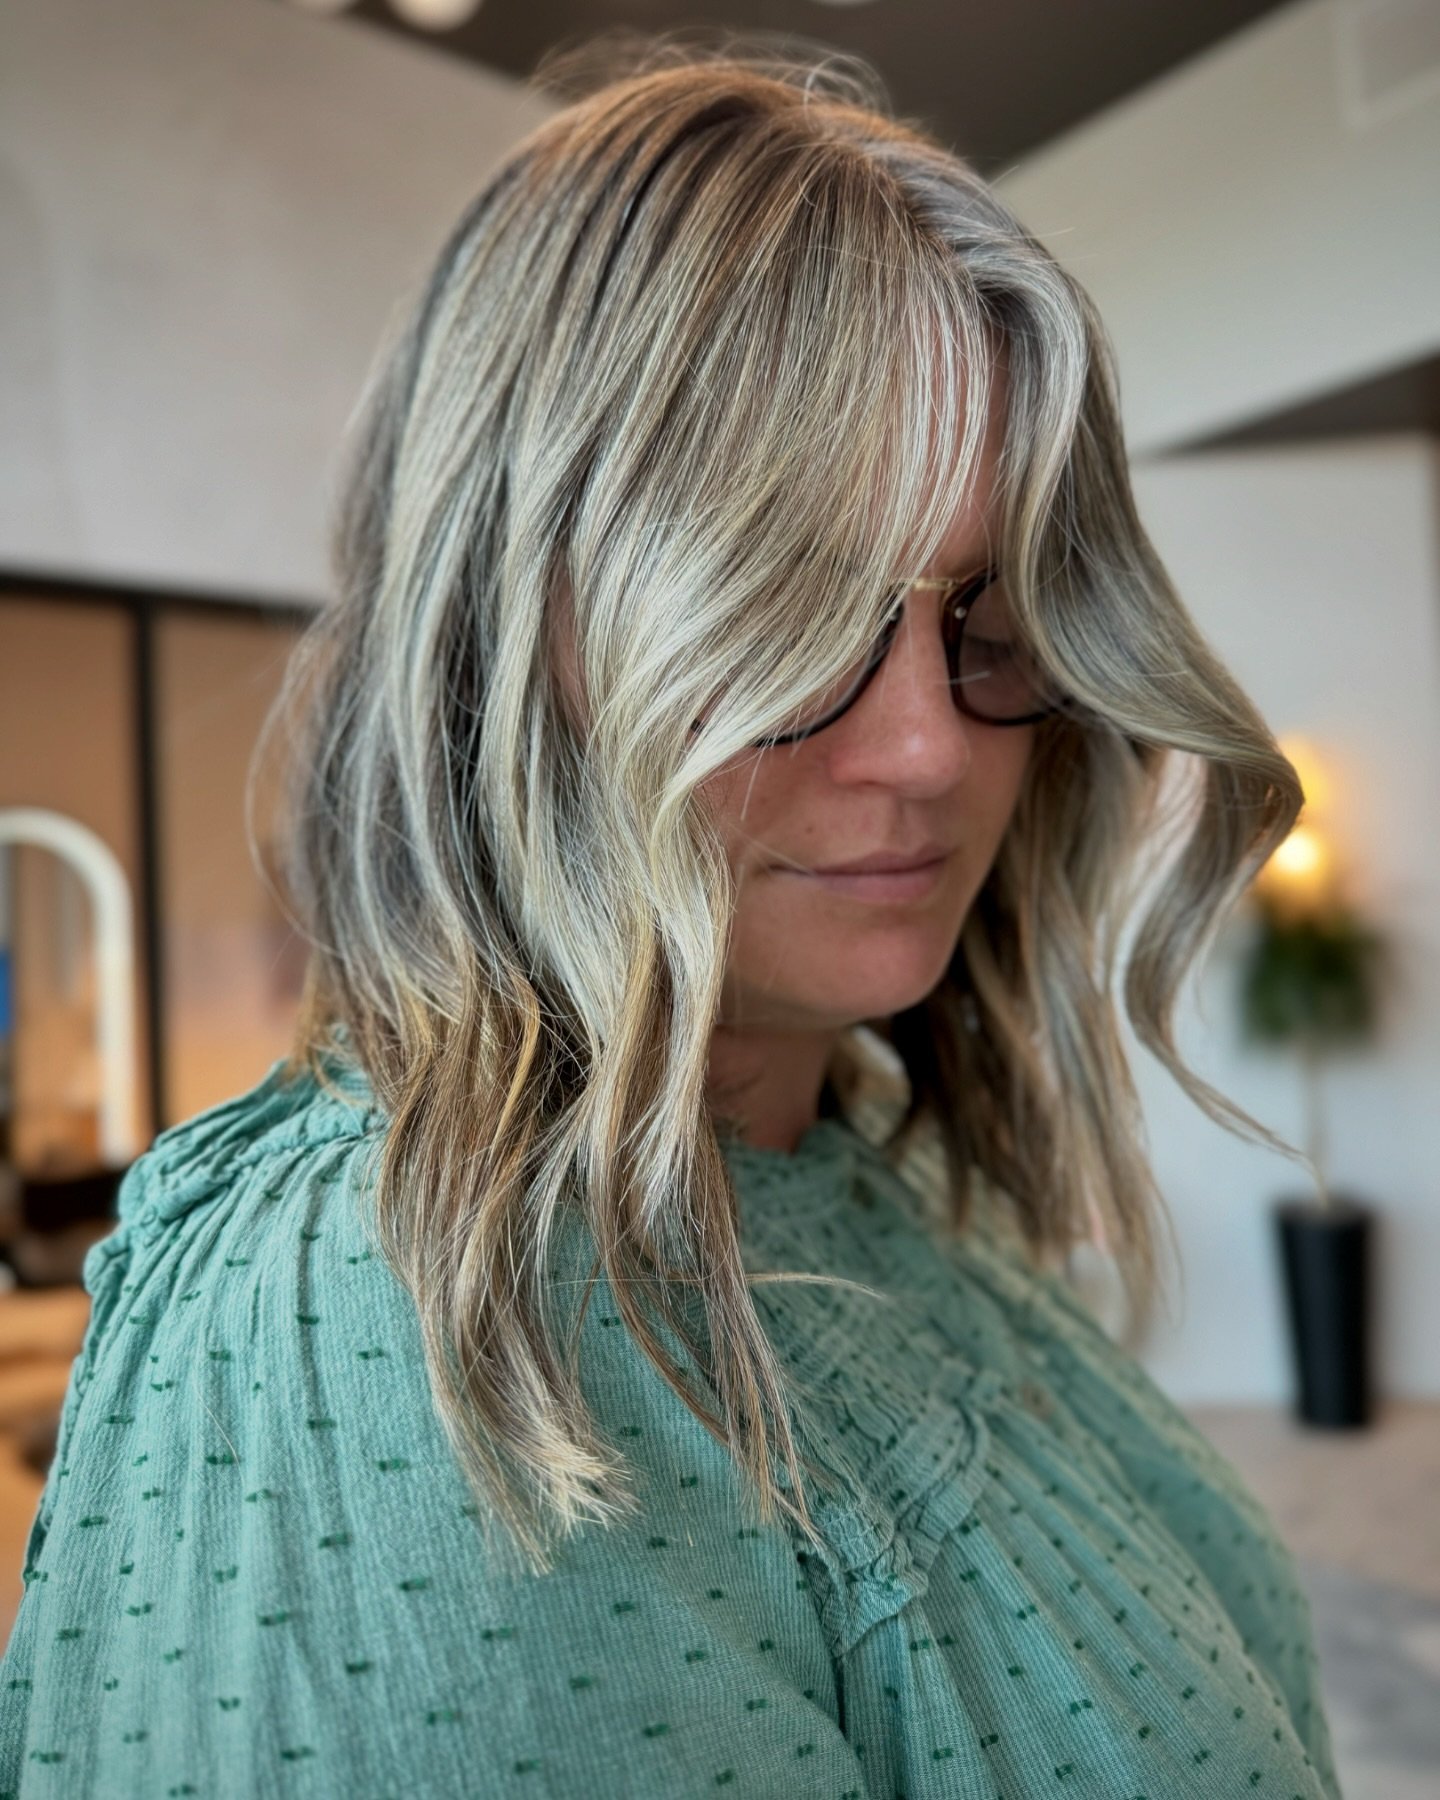 aaannddd I swoon 🤩

FORMULA:

Lightened with EVO bottle blonde lightener 20vol

Toned with 10.37 + 10.7 + 9.3 + clear 6.5vol

Root smudged with 8.1 + 7.03 6.5 cream

#evohueverse #bestinhue #evopro #evohair #charleston #charlestonsalon #charlestonst